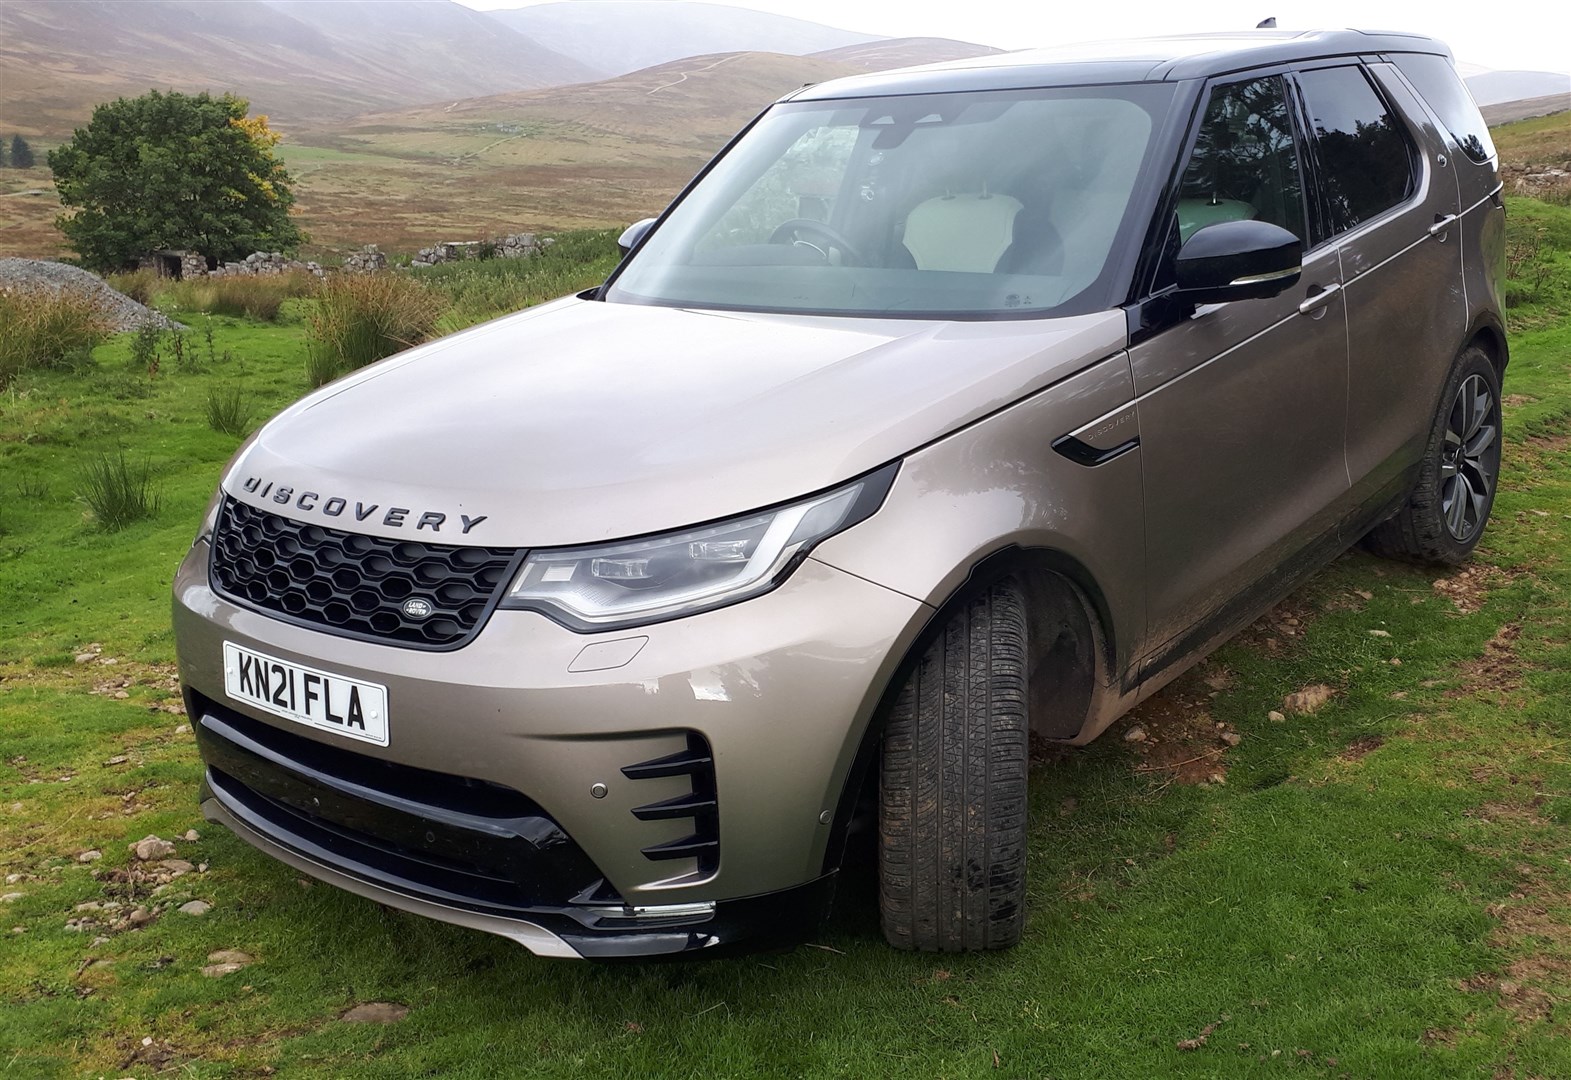 Motoring correspondent Alan Douglas puts a Land Rover Discovery SE R-Dynamic through its muddy paces